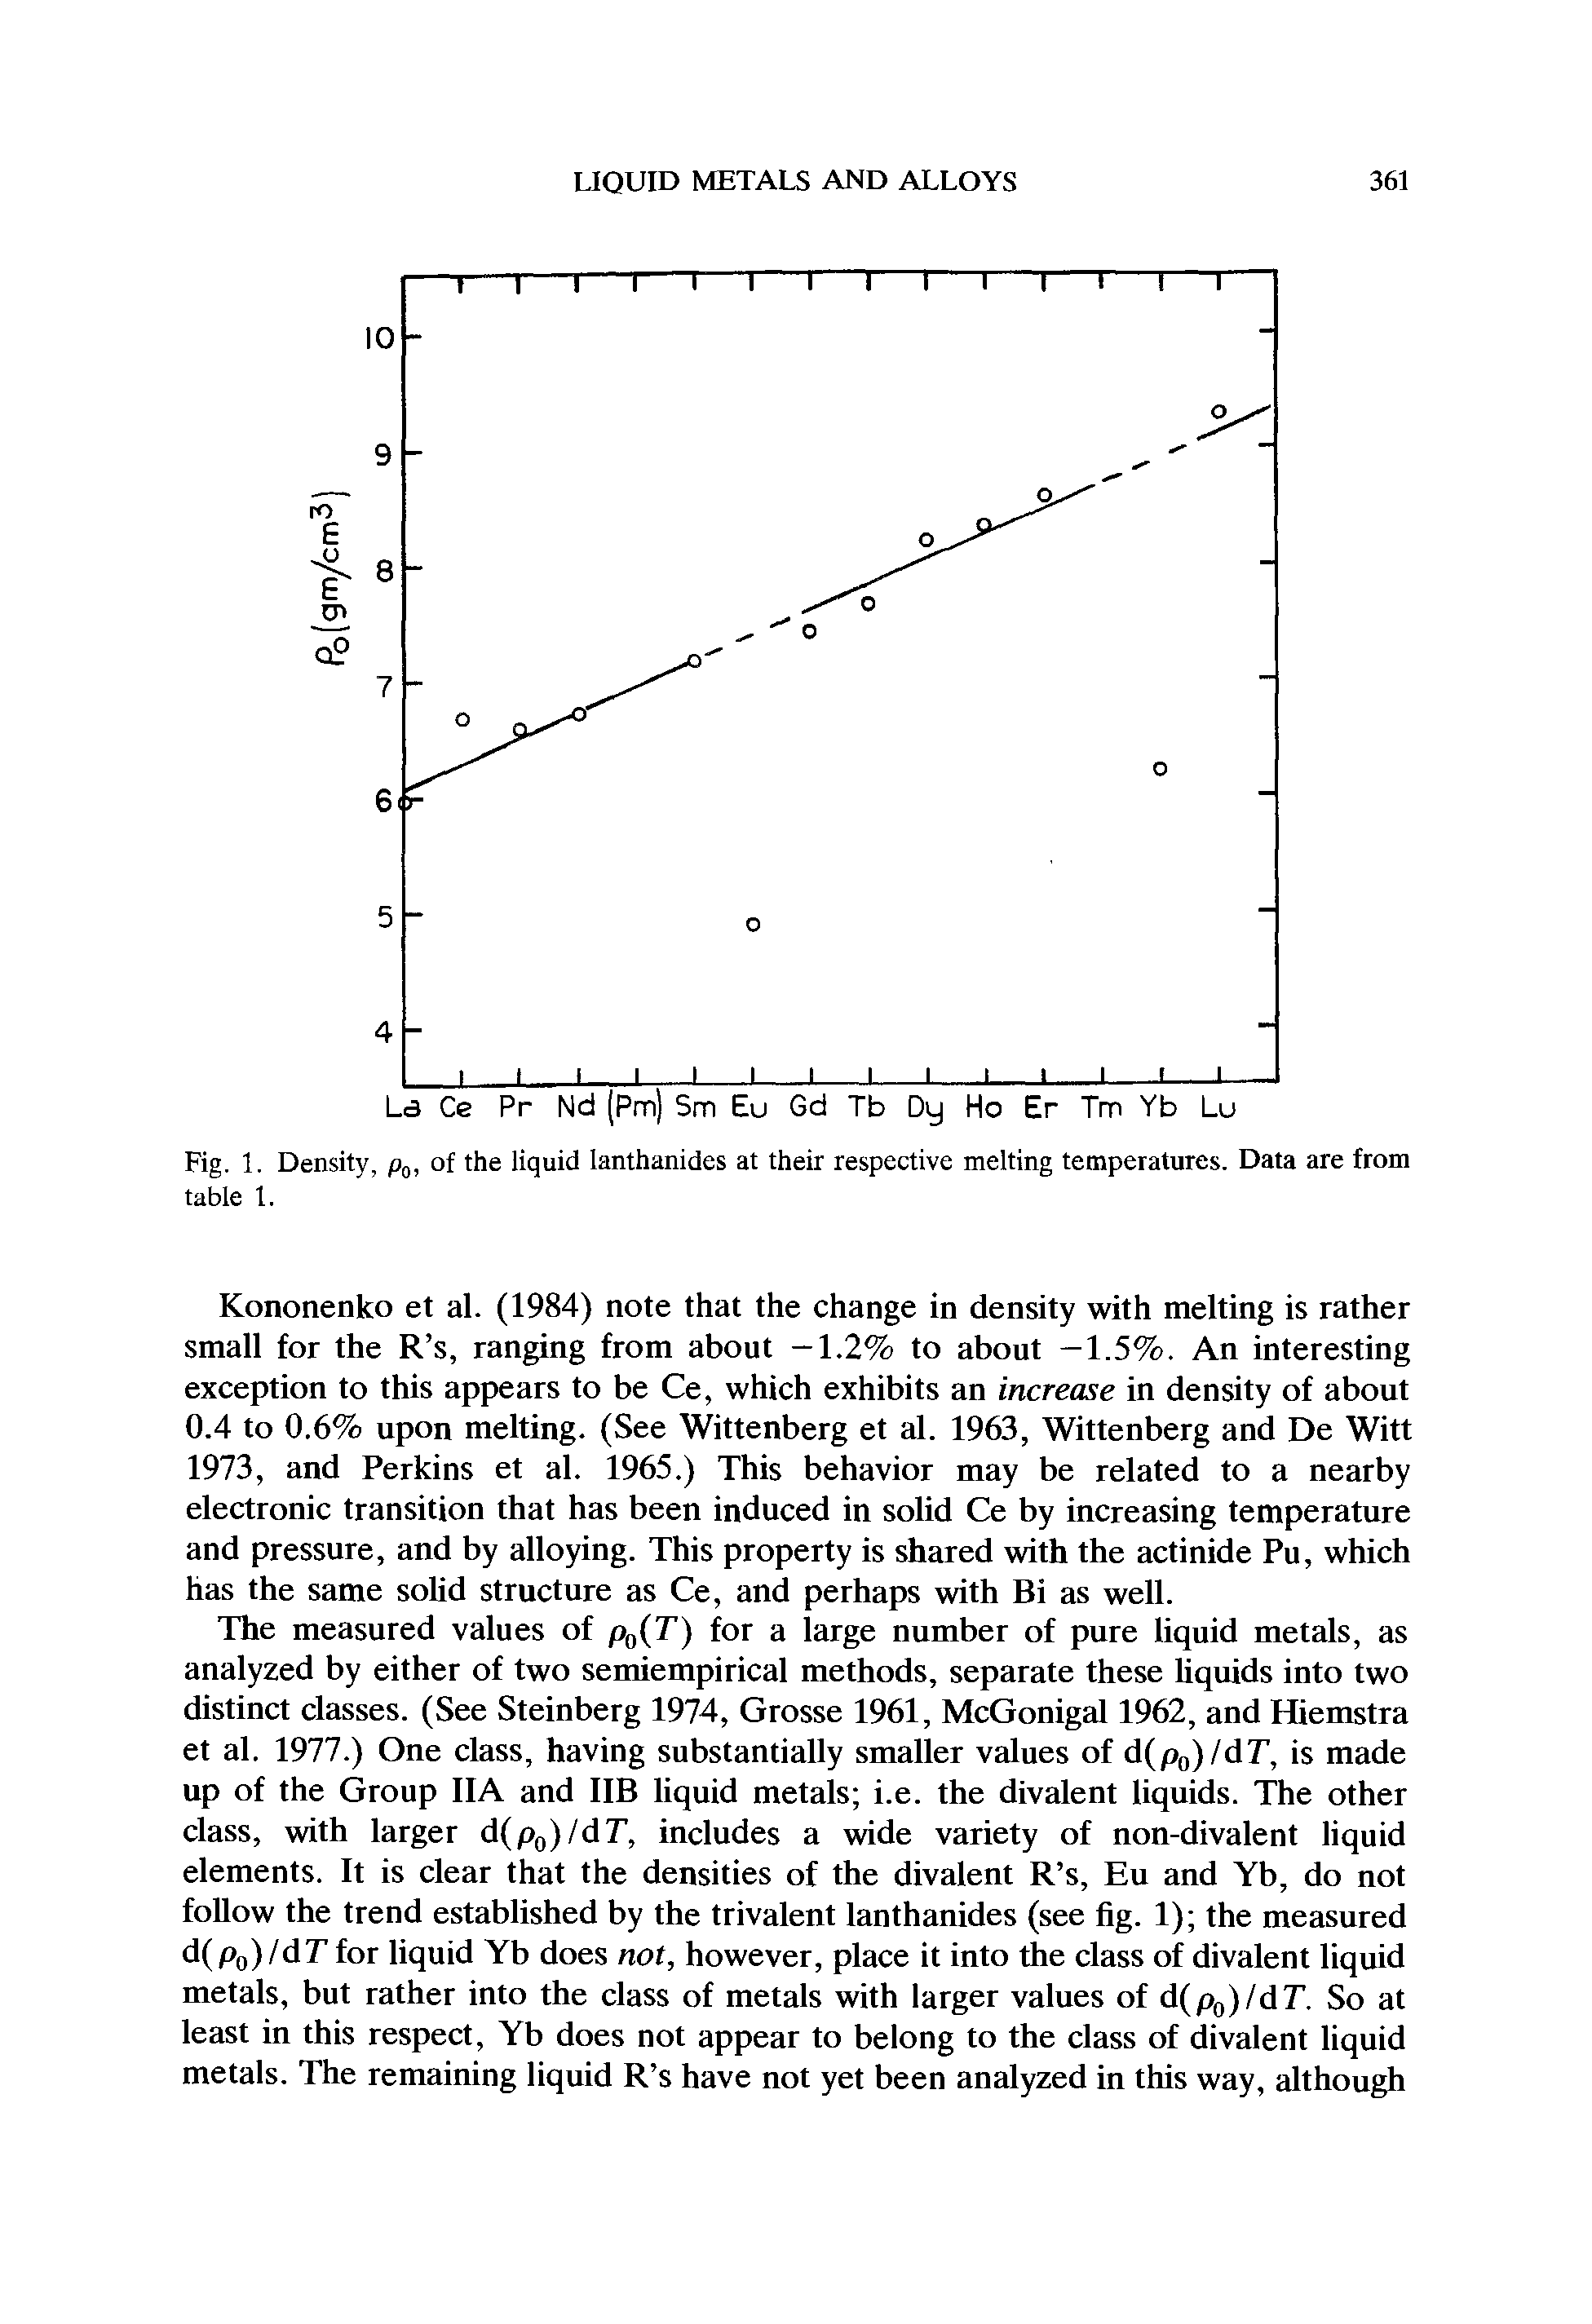 Fig. 1. Density, p, of the liquid lanthanides at their respective melting temperatures. Data are from table 1.